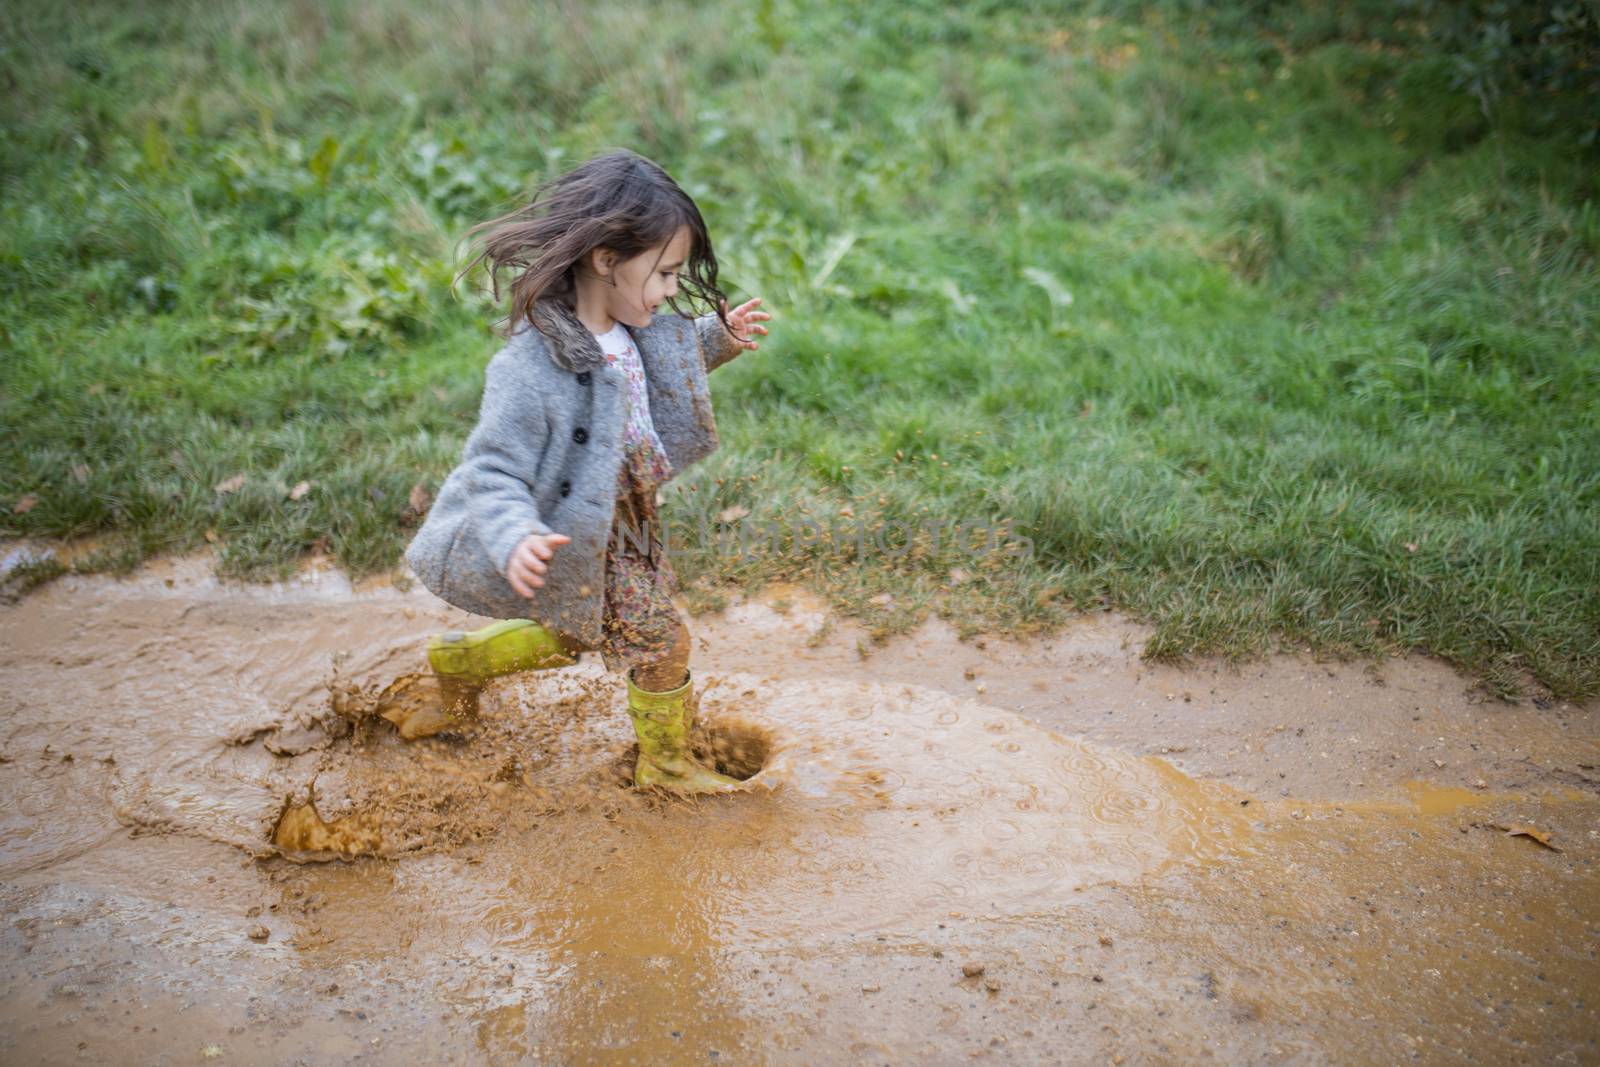 Happy little girl joyfully splashing and running through a muddy puddle. Young child having fun and getting dirty in puddles. Kids playing outside